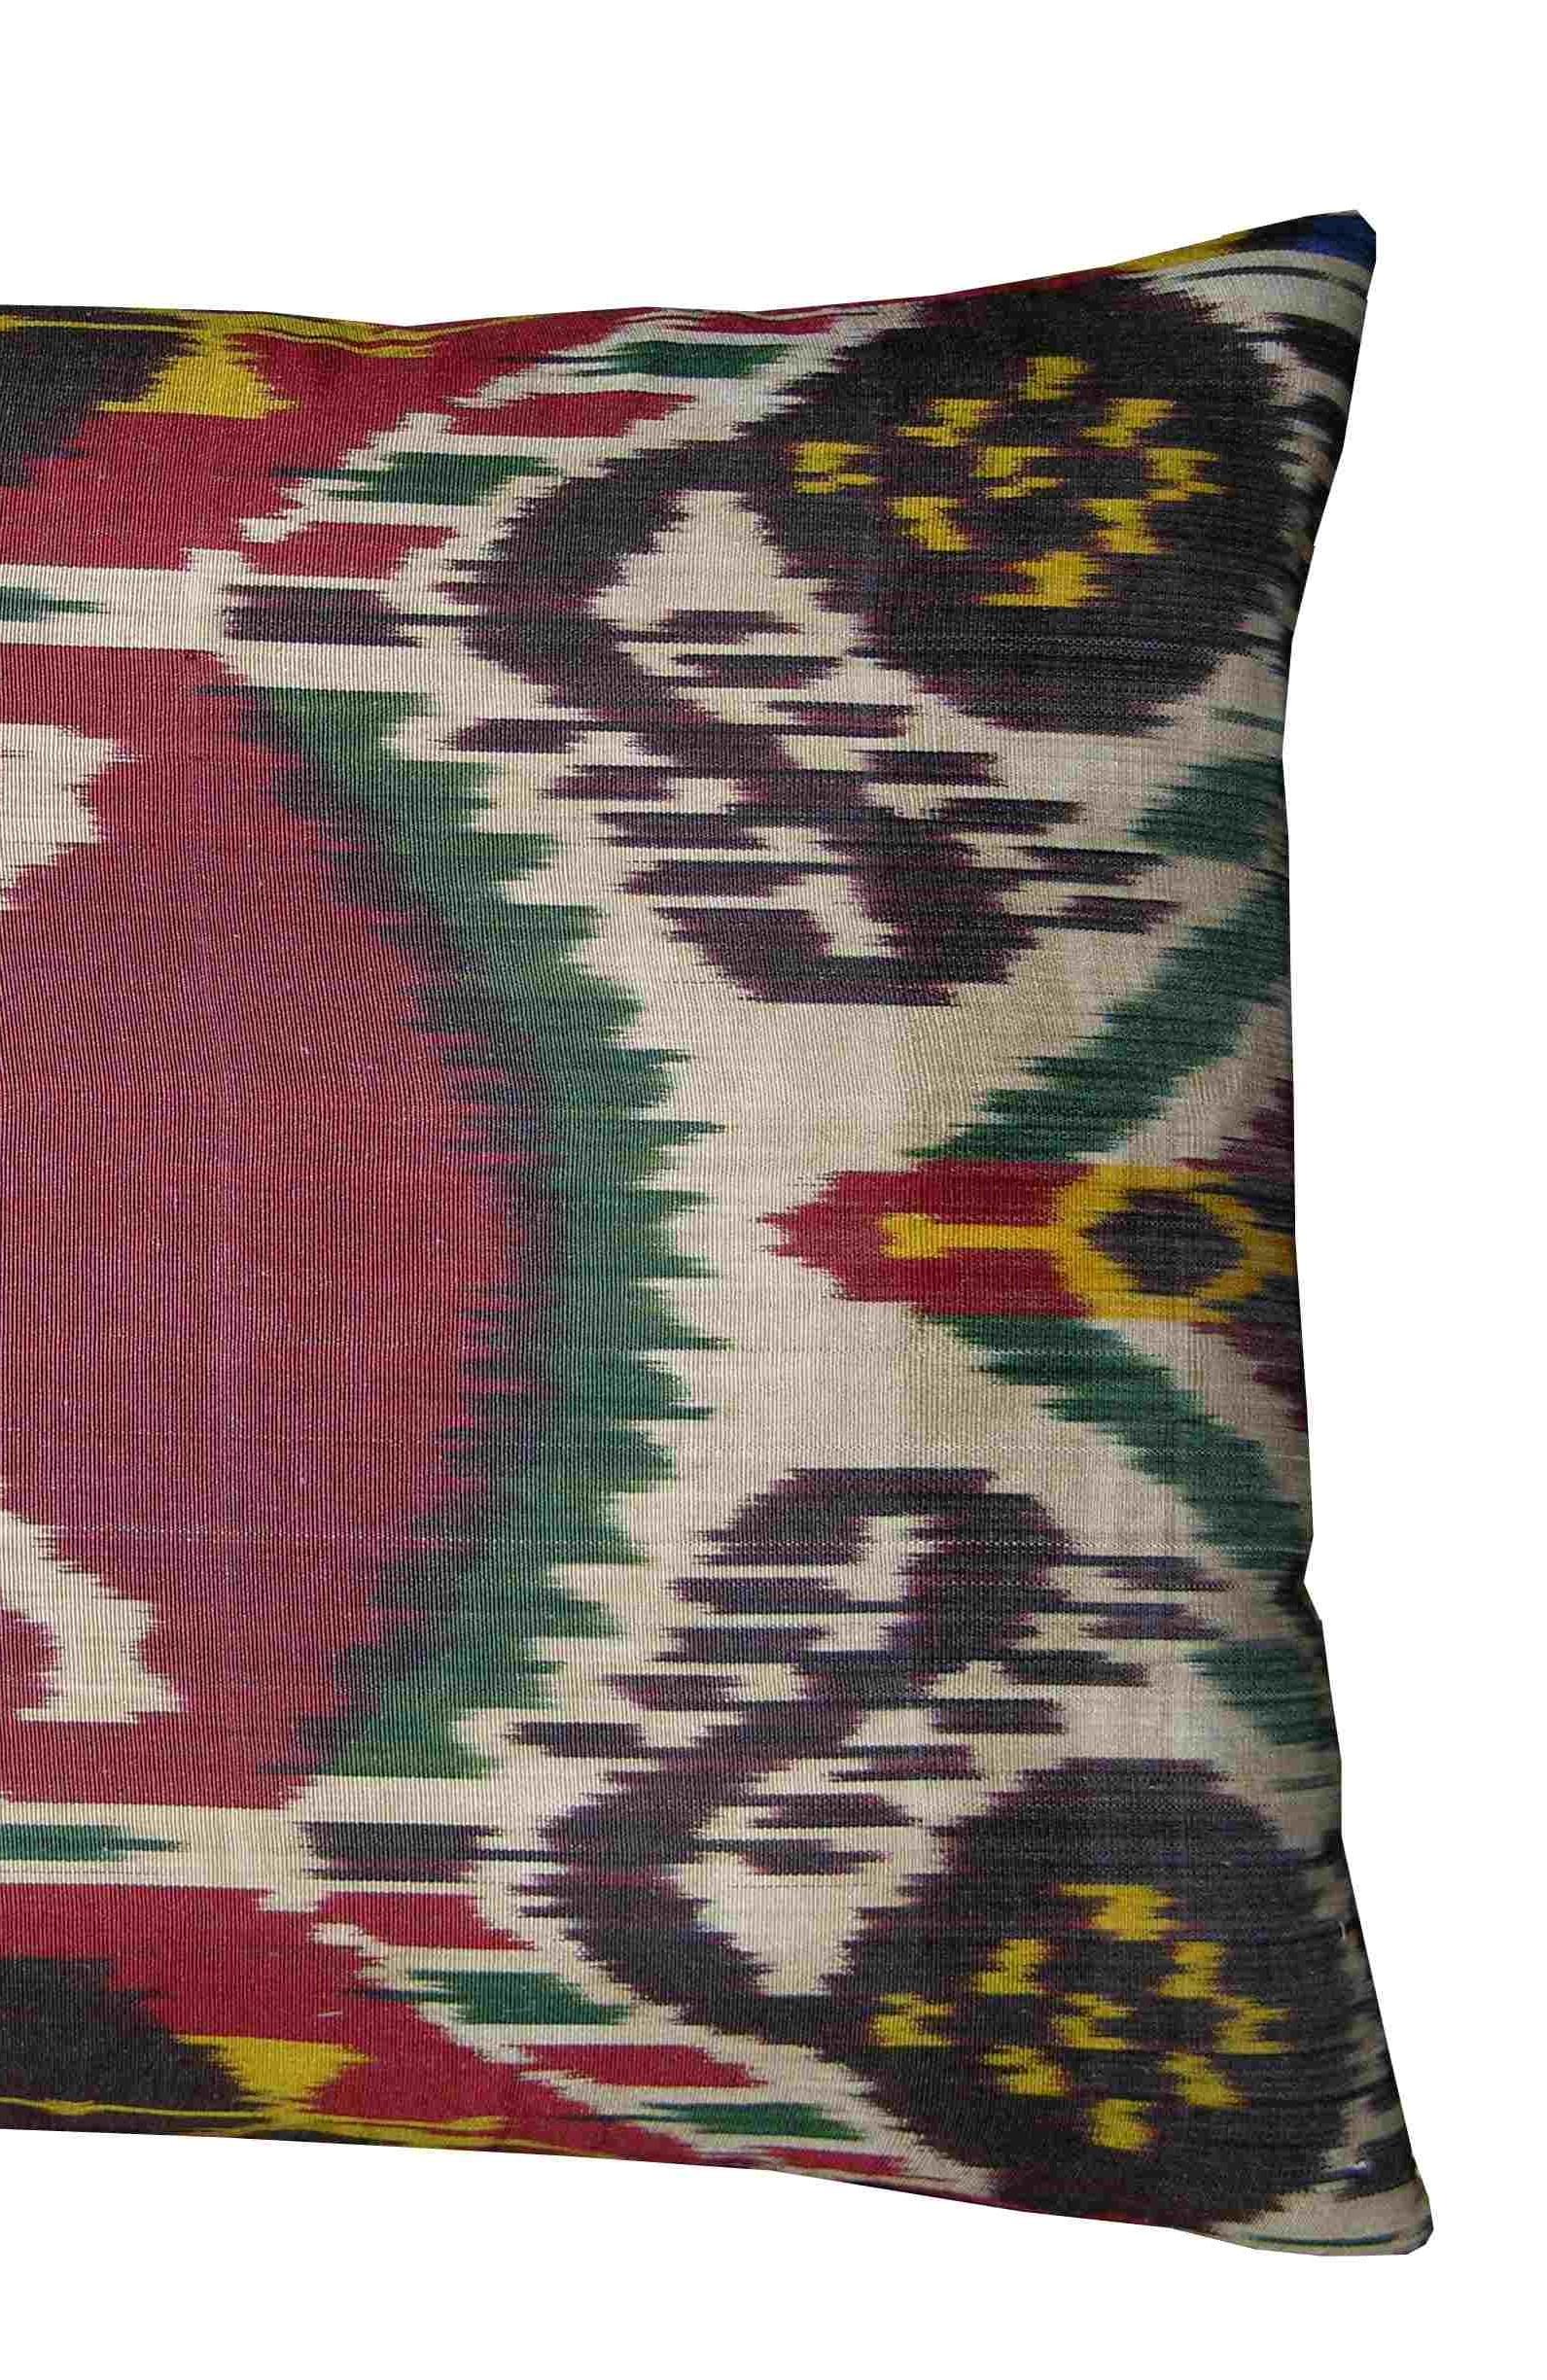 Ca. 1900 Antique Ikat Tapestry Pillow